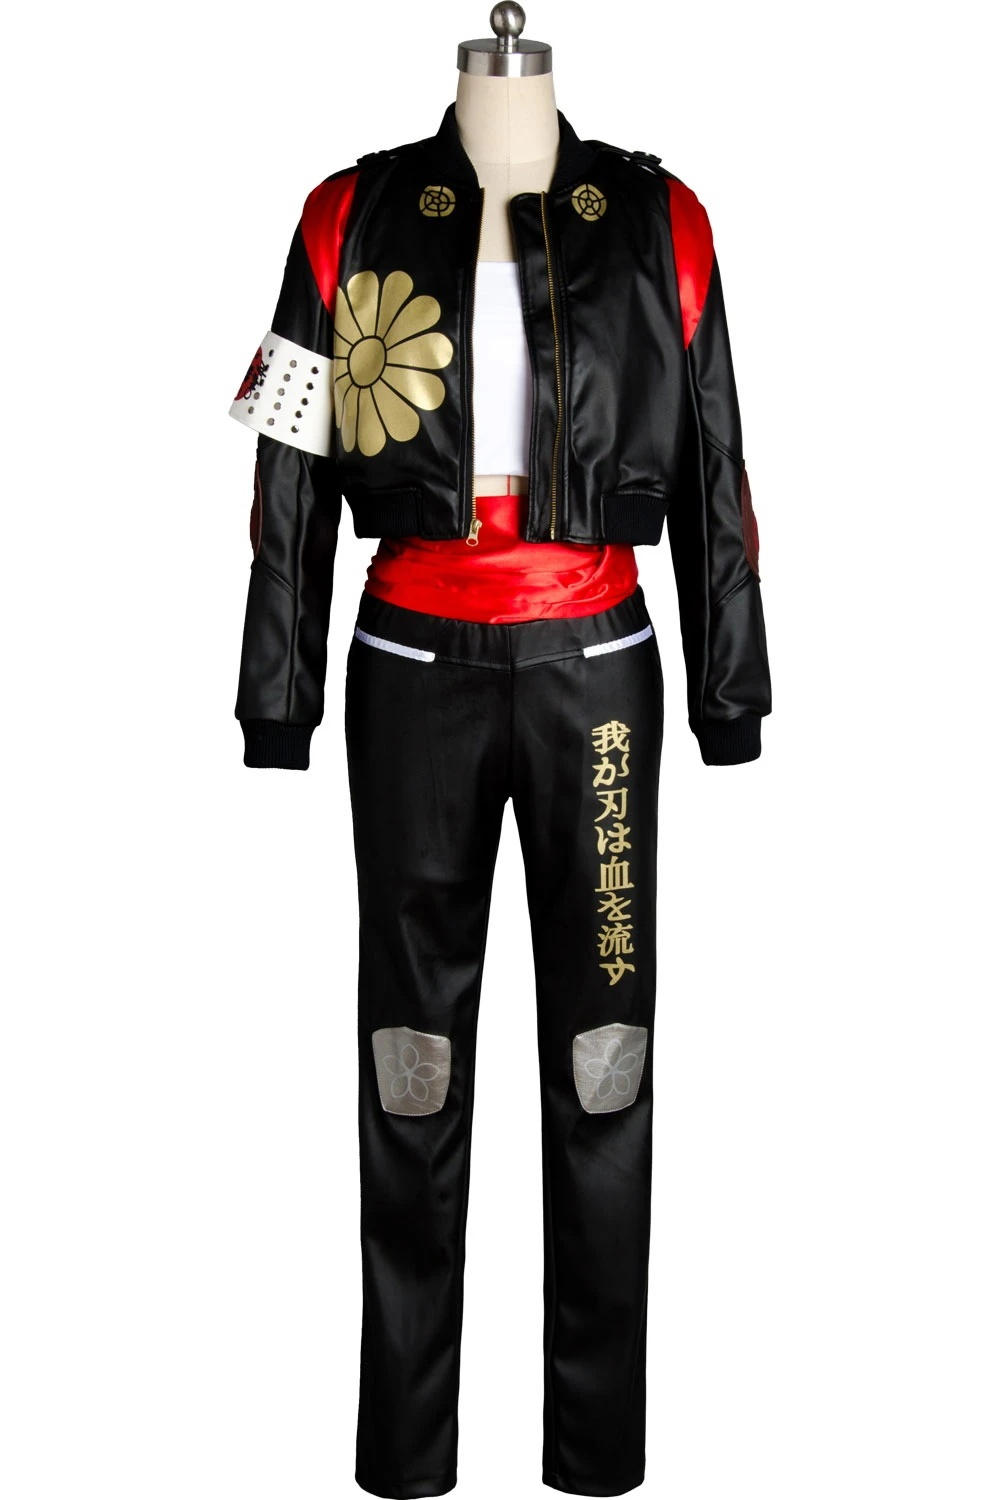 Dc Suicide Squad Katana Outfit Cosplay Costume